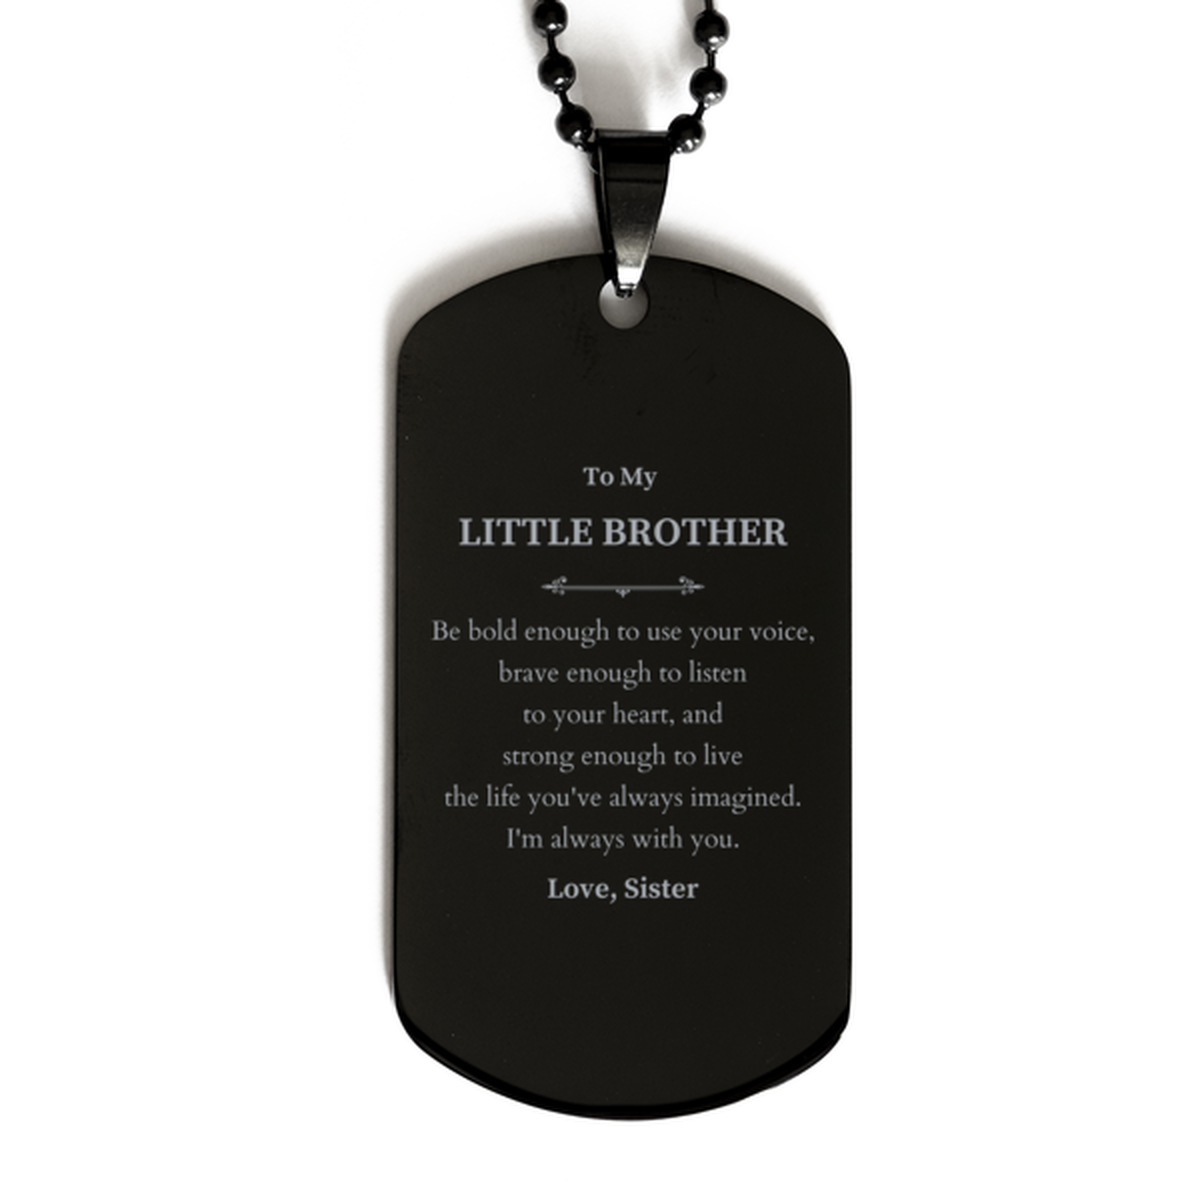 Keepsake Little Brother Black Dog Tag Gift Idea Graduation Christmas Birthday Little Brother from Sister, Little Brother Be bold enough to use your voice, brave enough to listen to your heart. Love, Sister